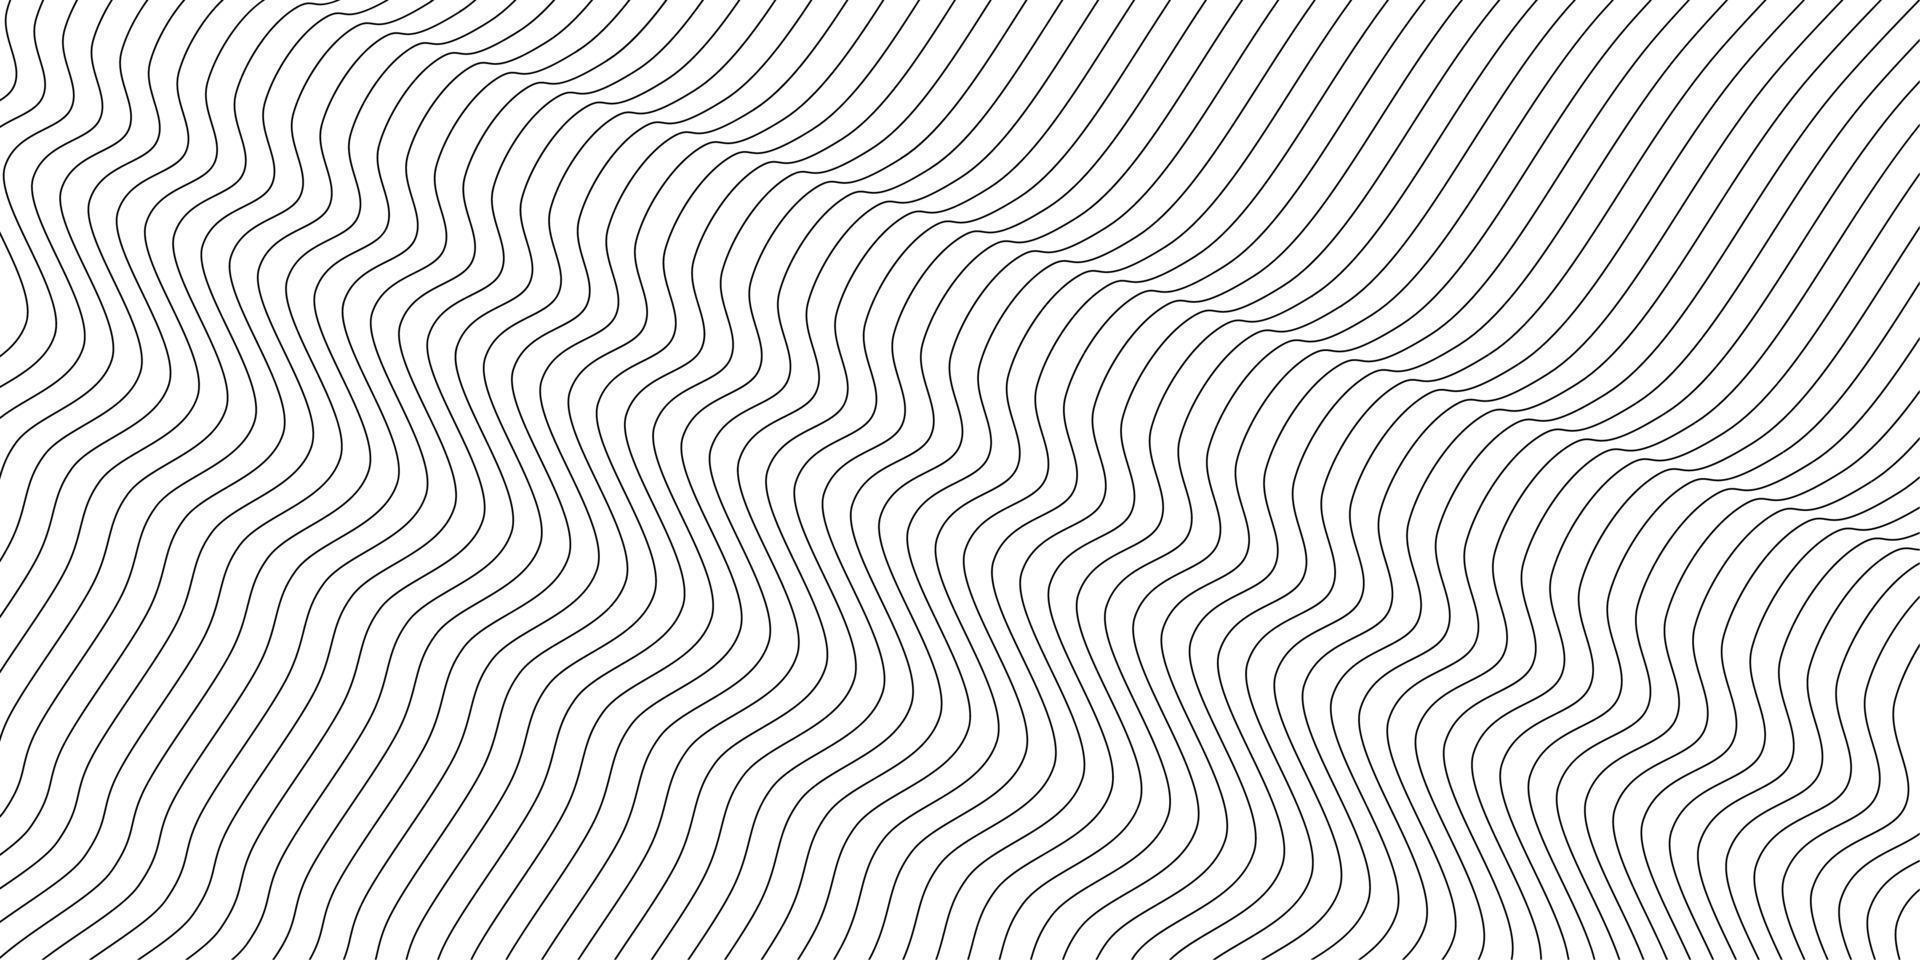 Abstract wavy background. Thin line on white vector